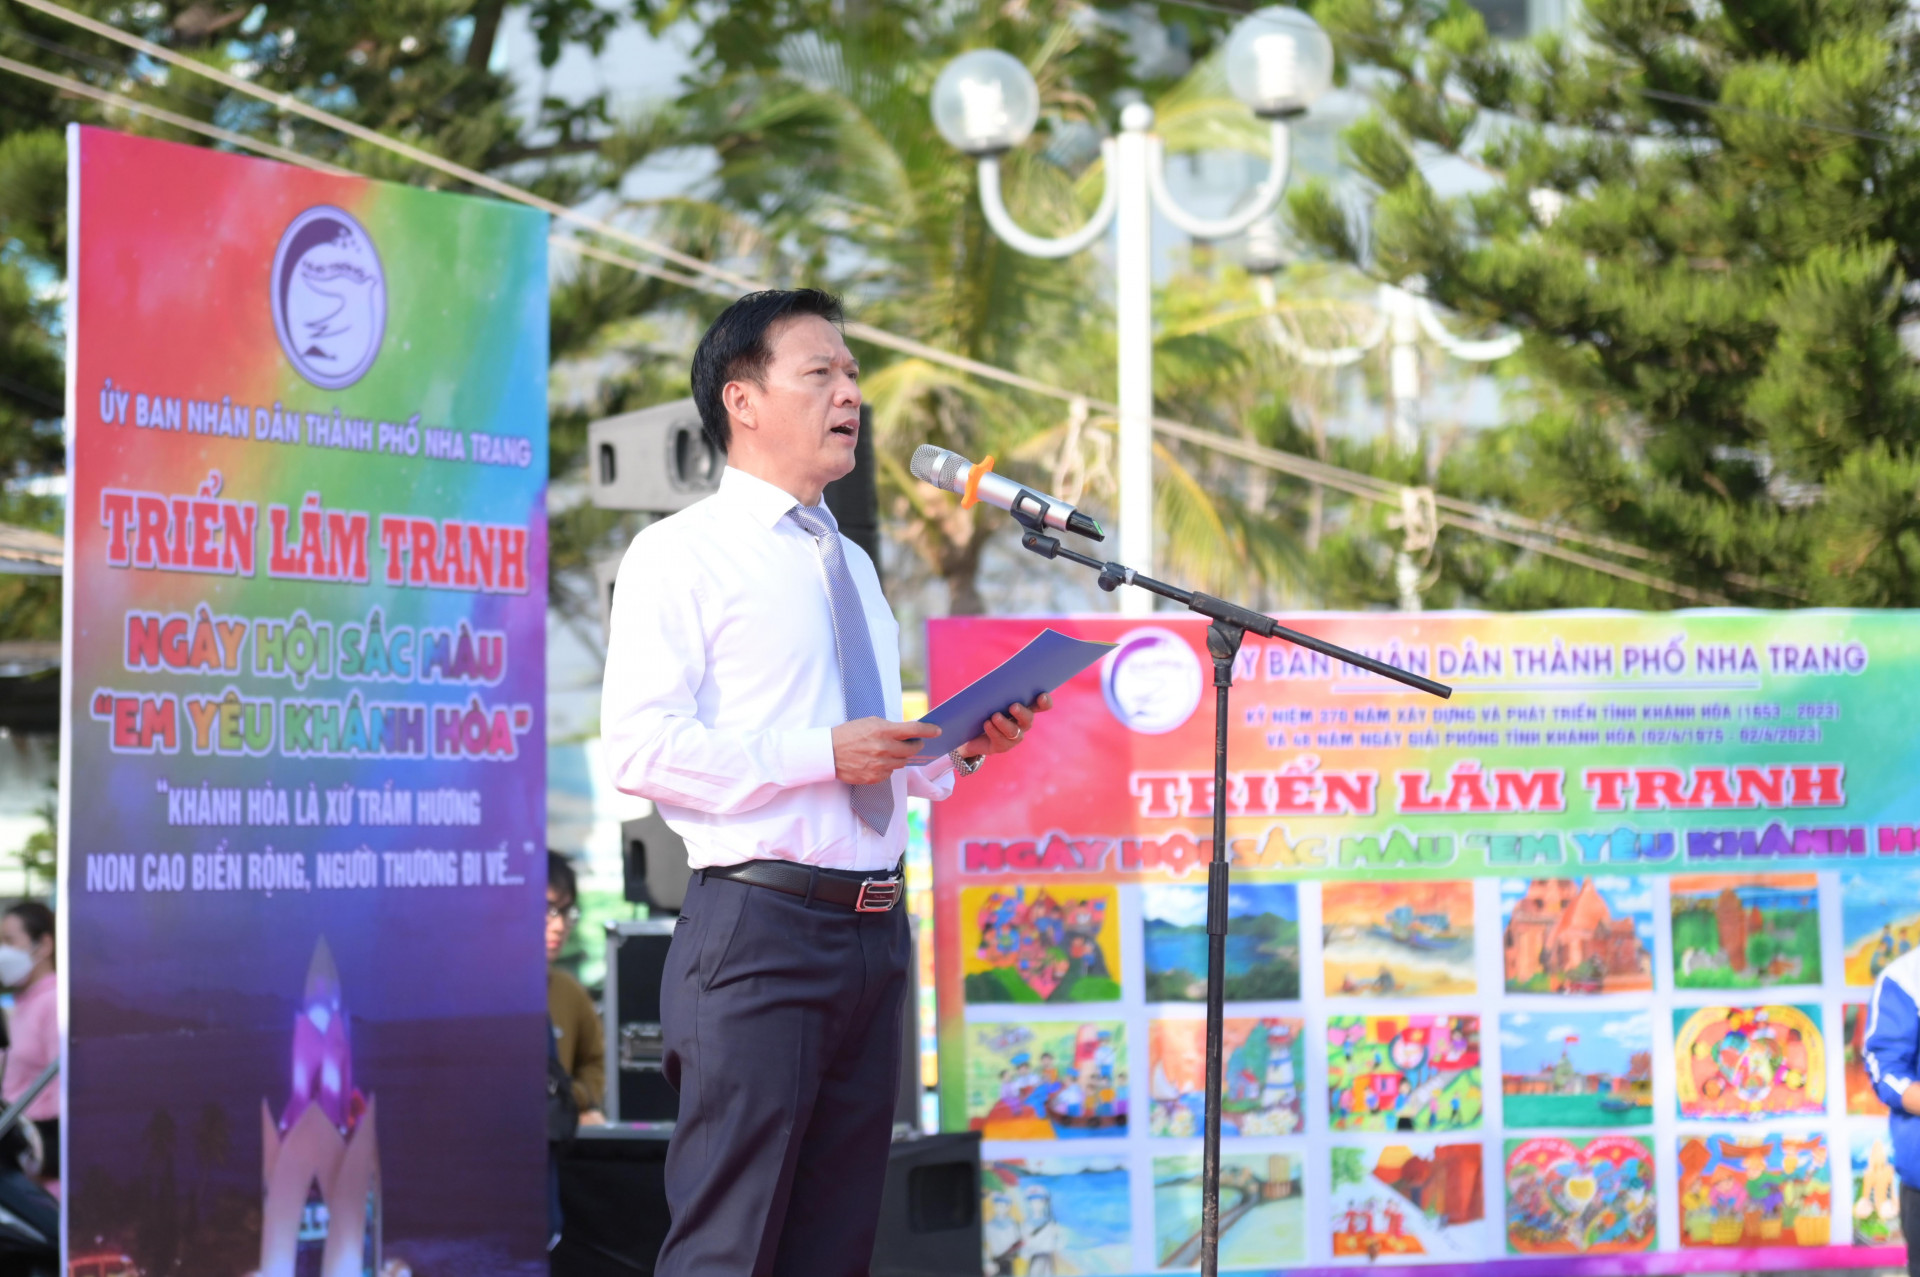 Phan Thanh Liem, vice-chairman of Nha Trang City People's Committee giving opening speech